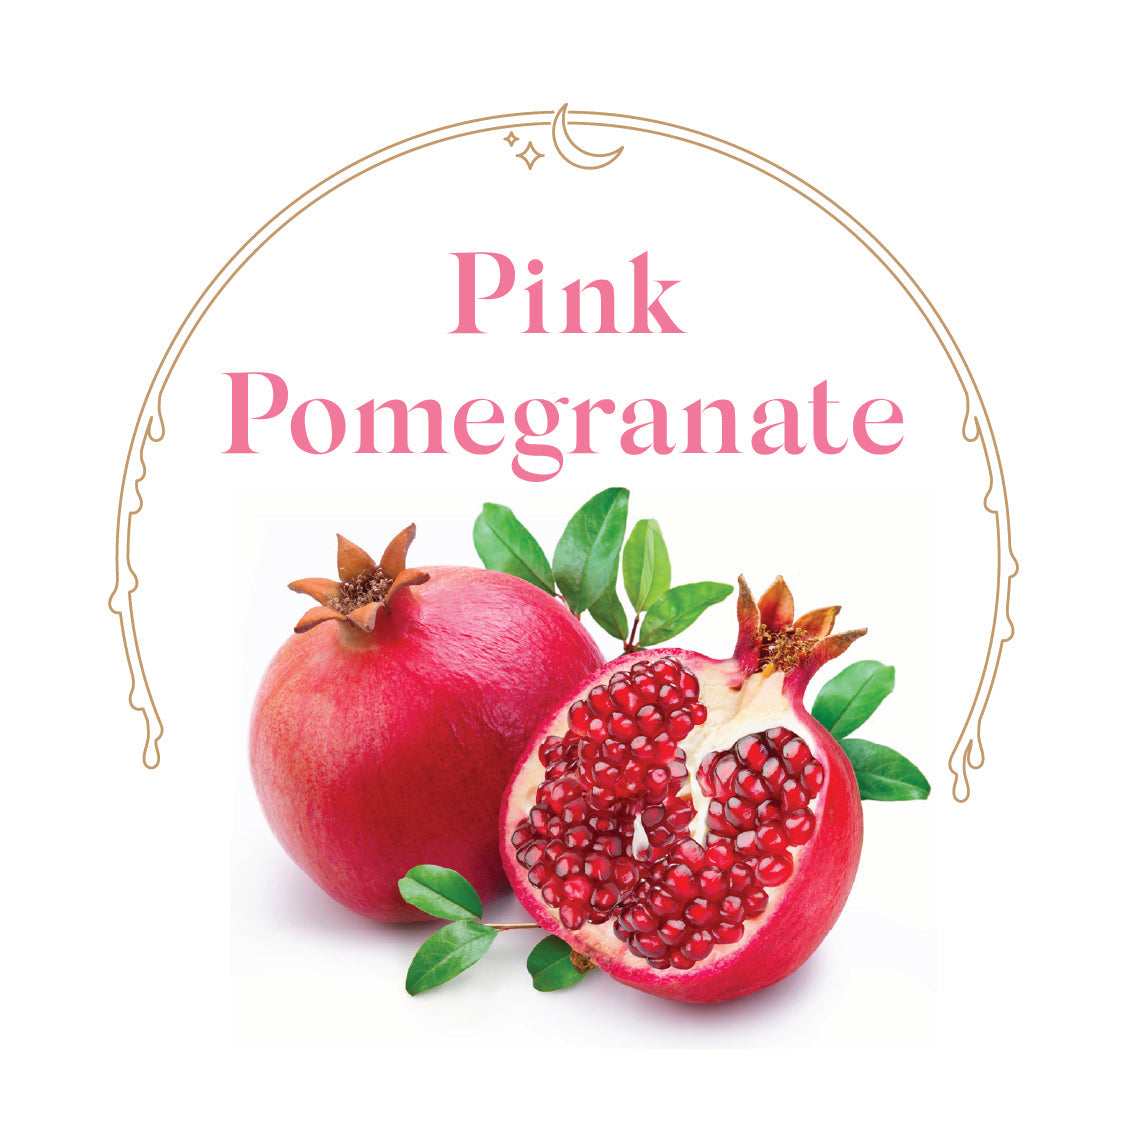 Pink Pomegranate - House Scented Candle 8 oz